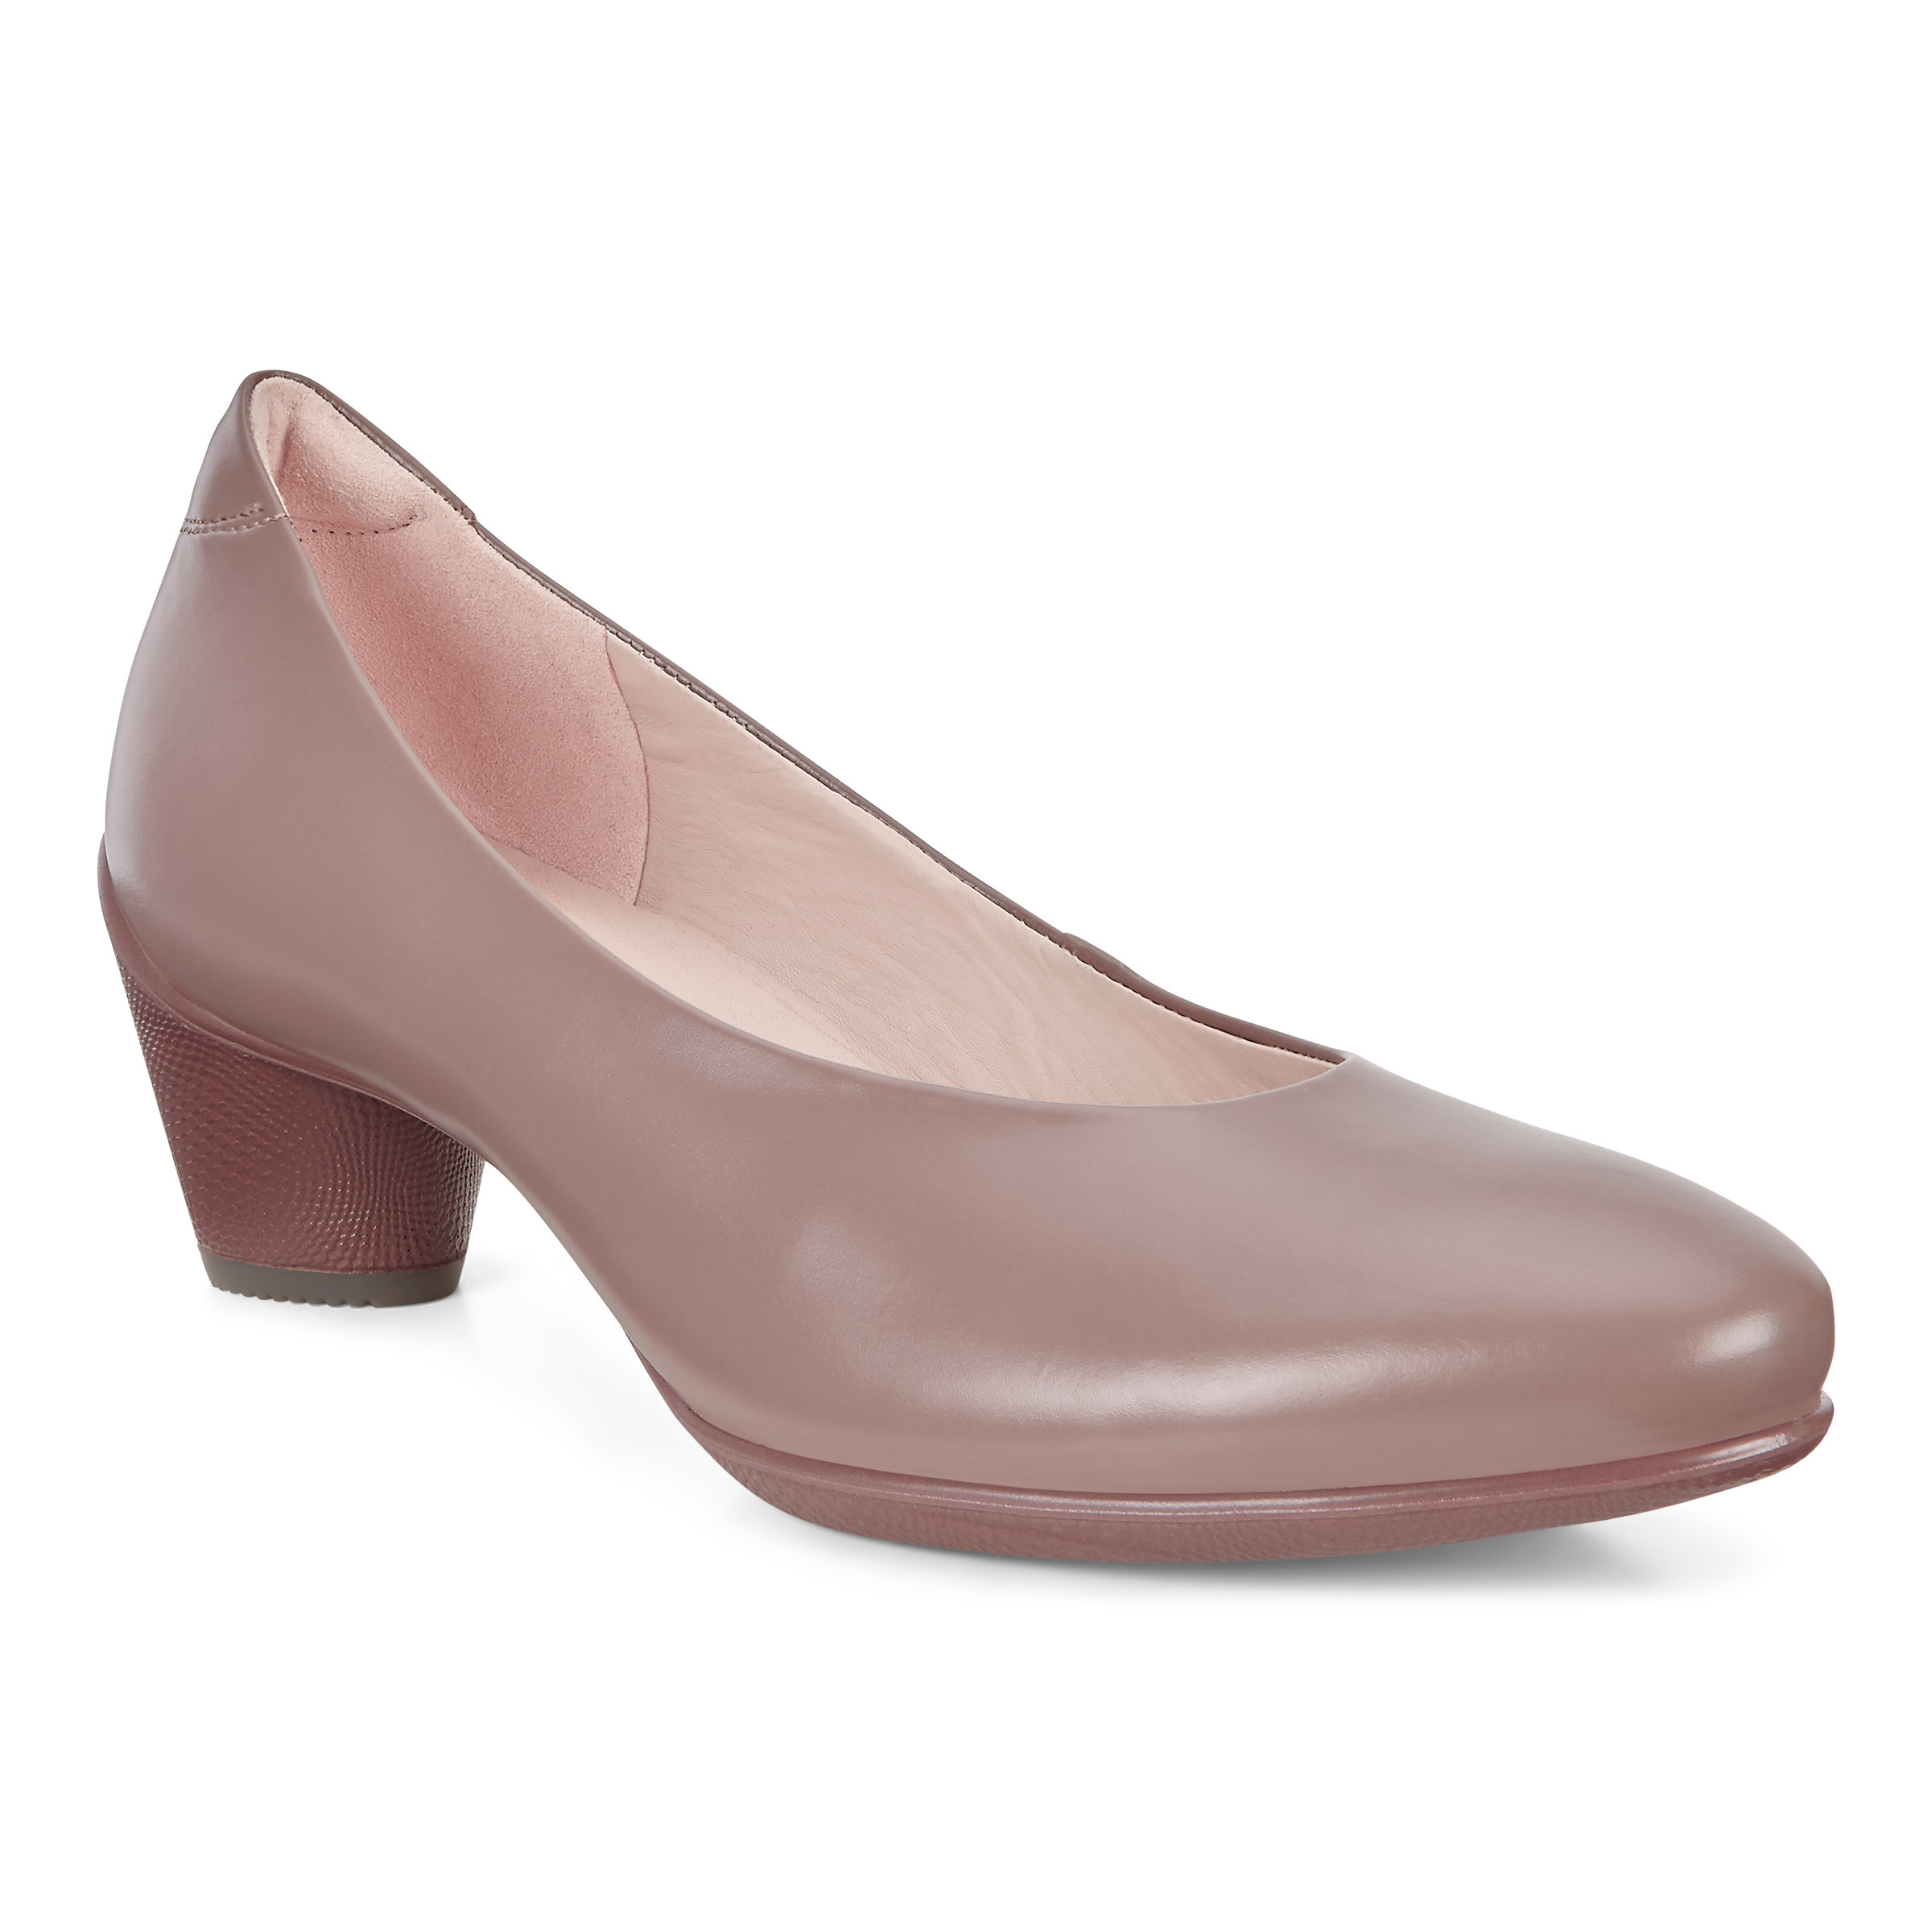 Clearance - SCULPTURED - ECCO Shoes NZ